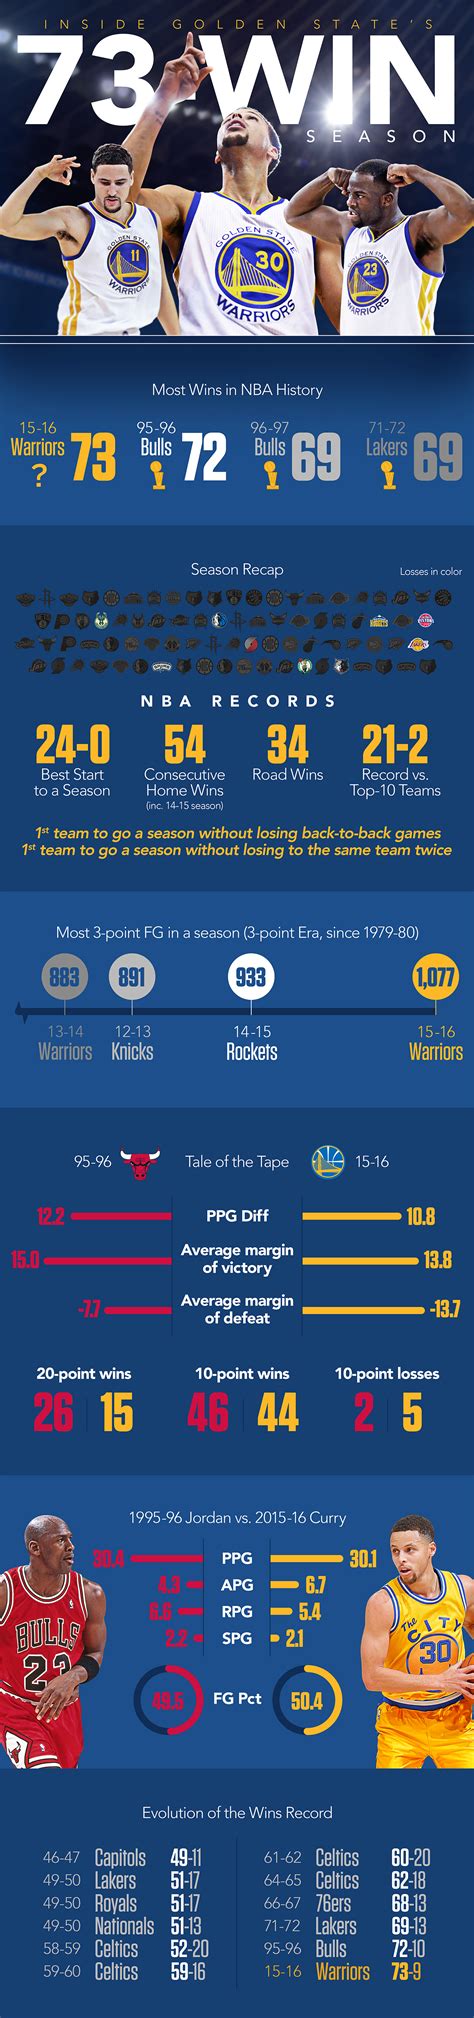 golden state warriors players stats